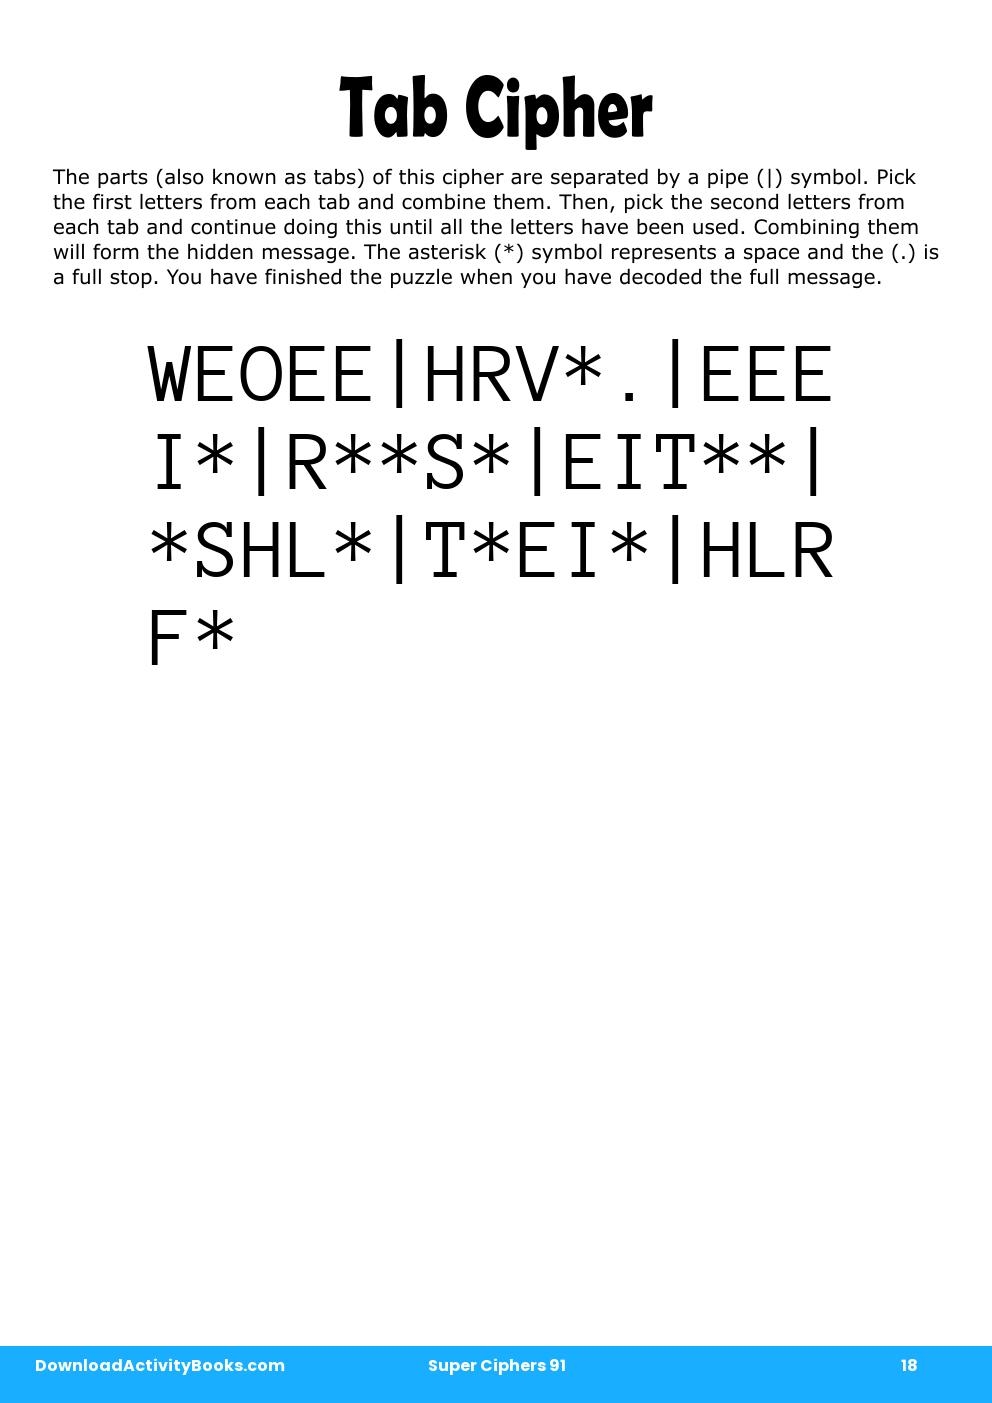 Tab Cipher in Super Ciphers 91